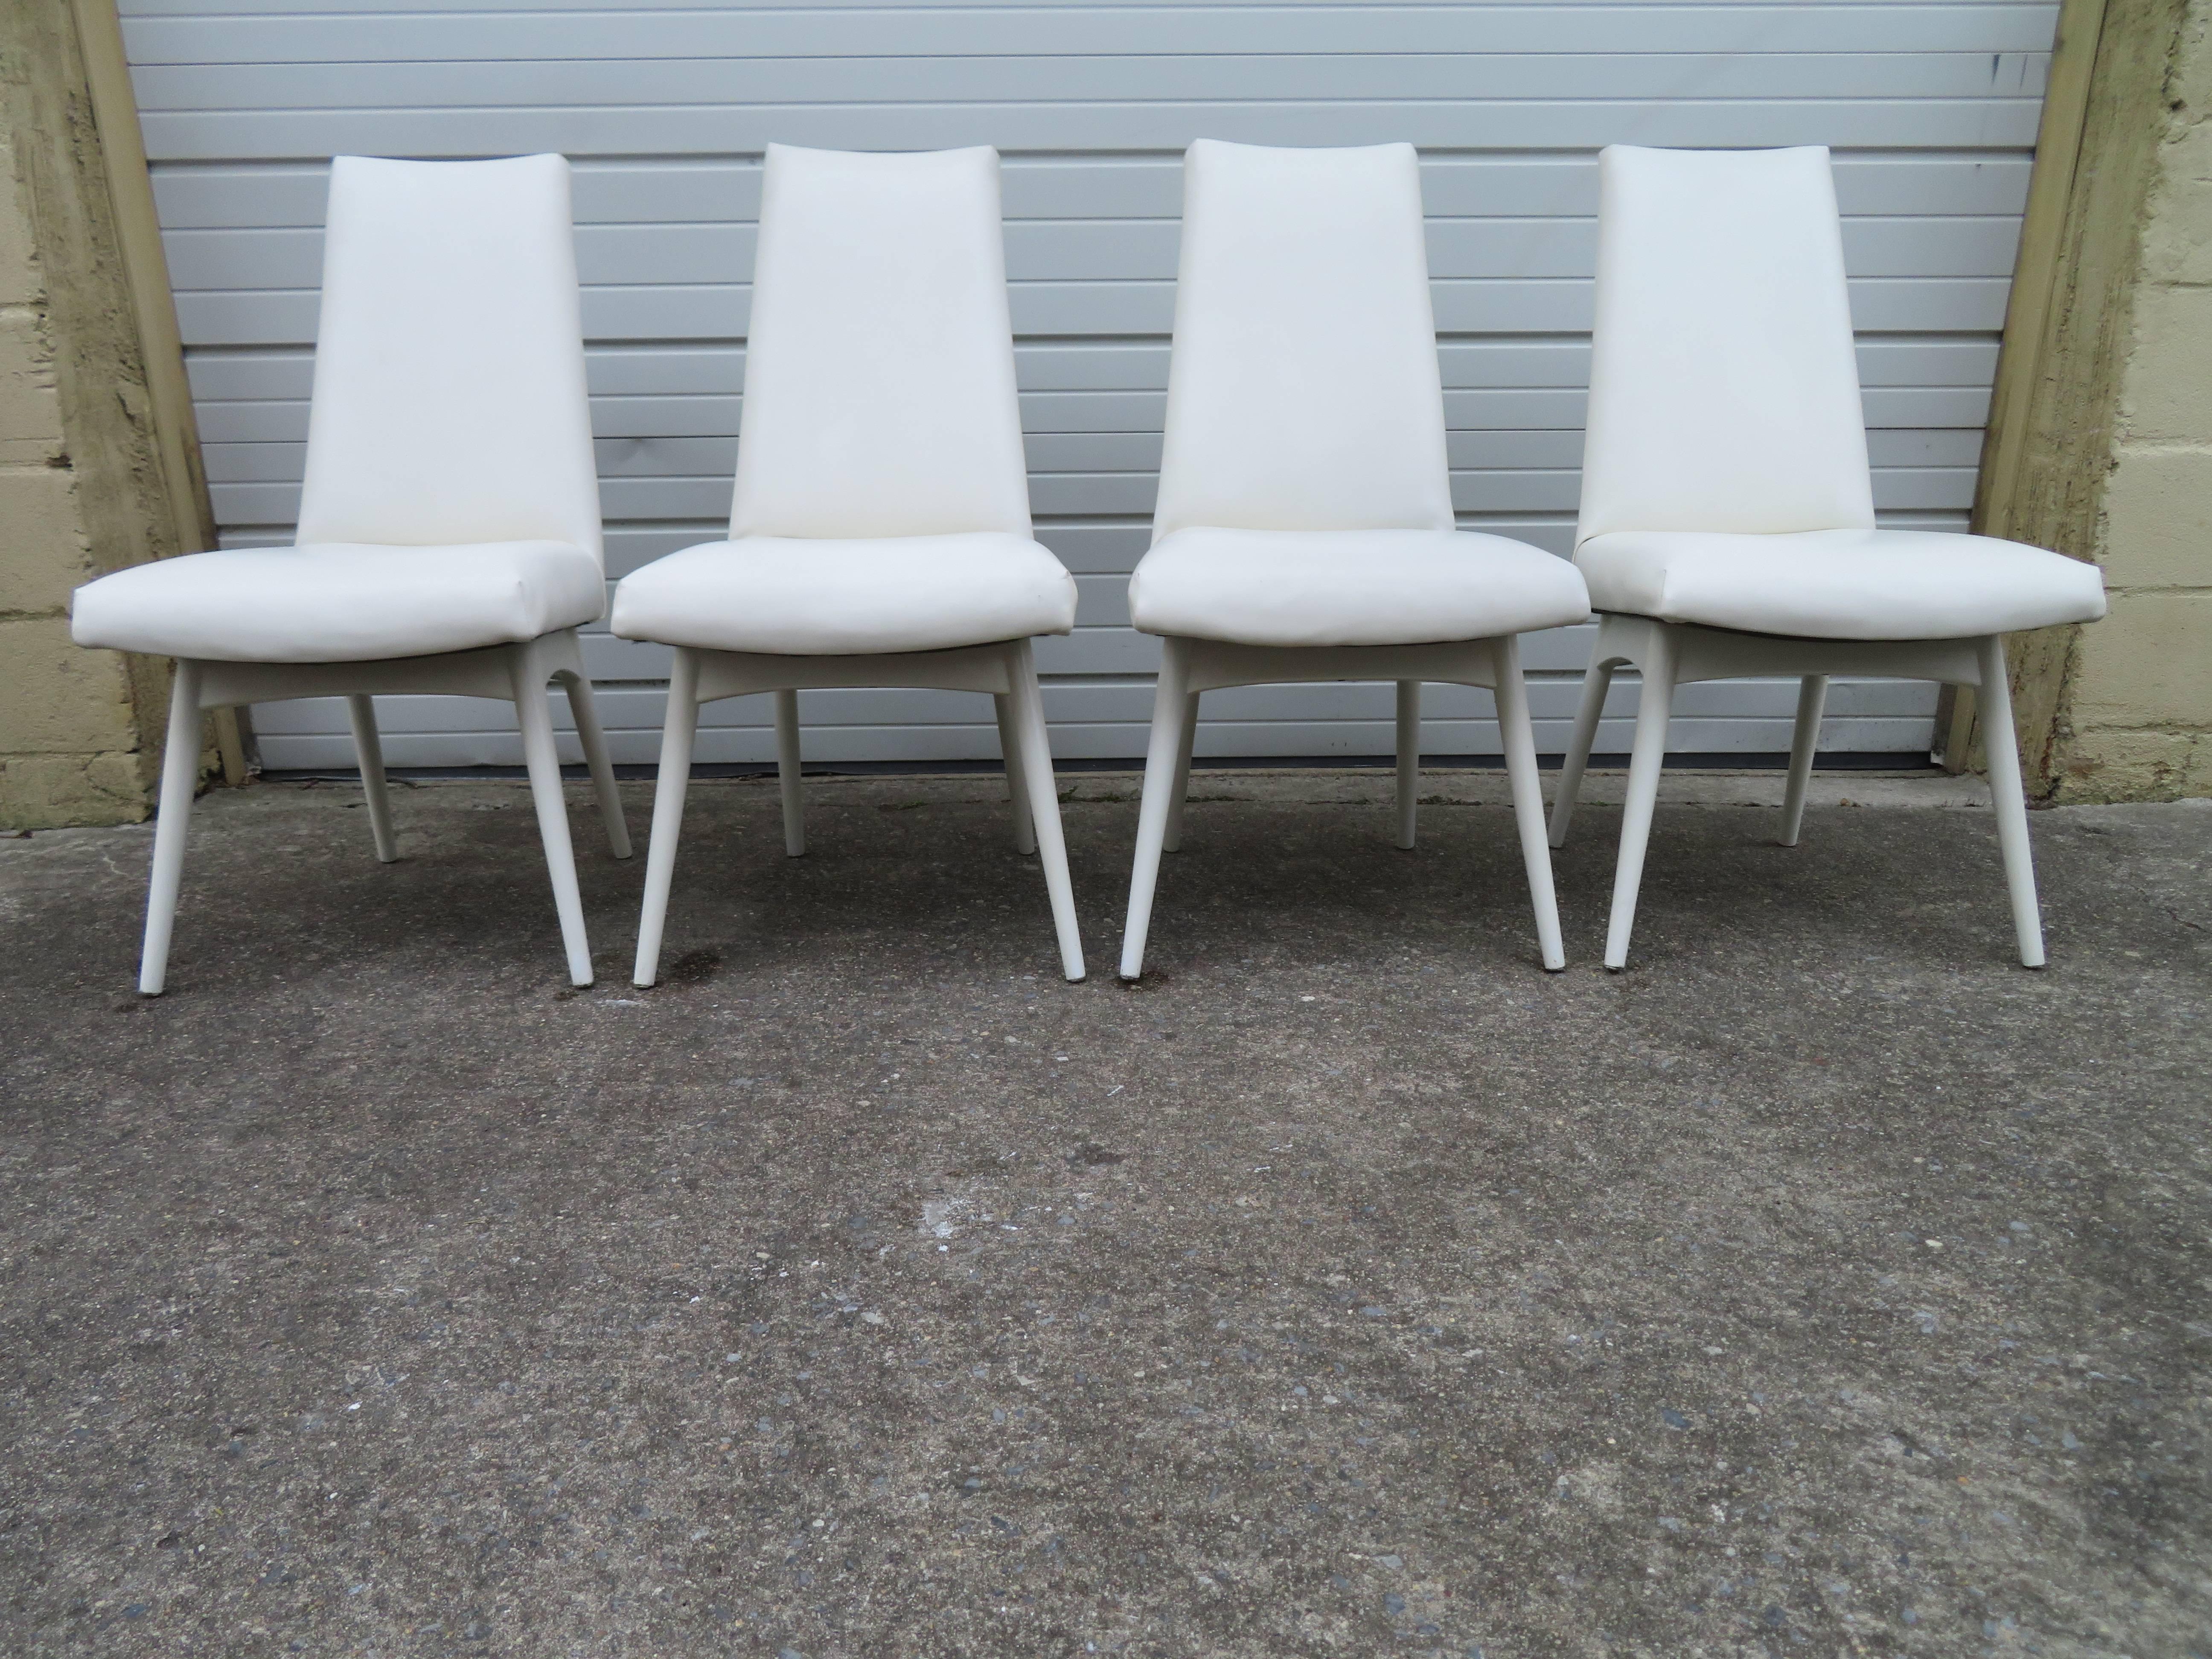 Stunning set of four Adrian Pearsall white lacquered dining chairs. These chairs retain their original white lacquered finish in very nice condition-very rare color. Also the white faux leather is vintage and still looks great-very well cared for.